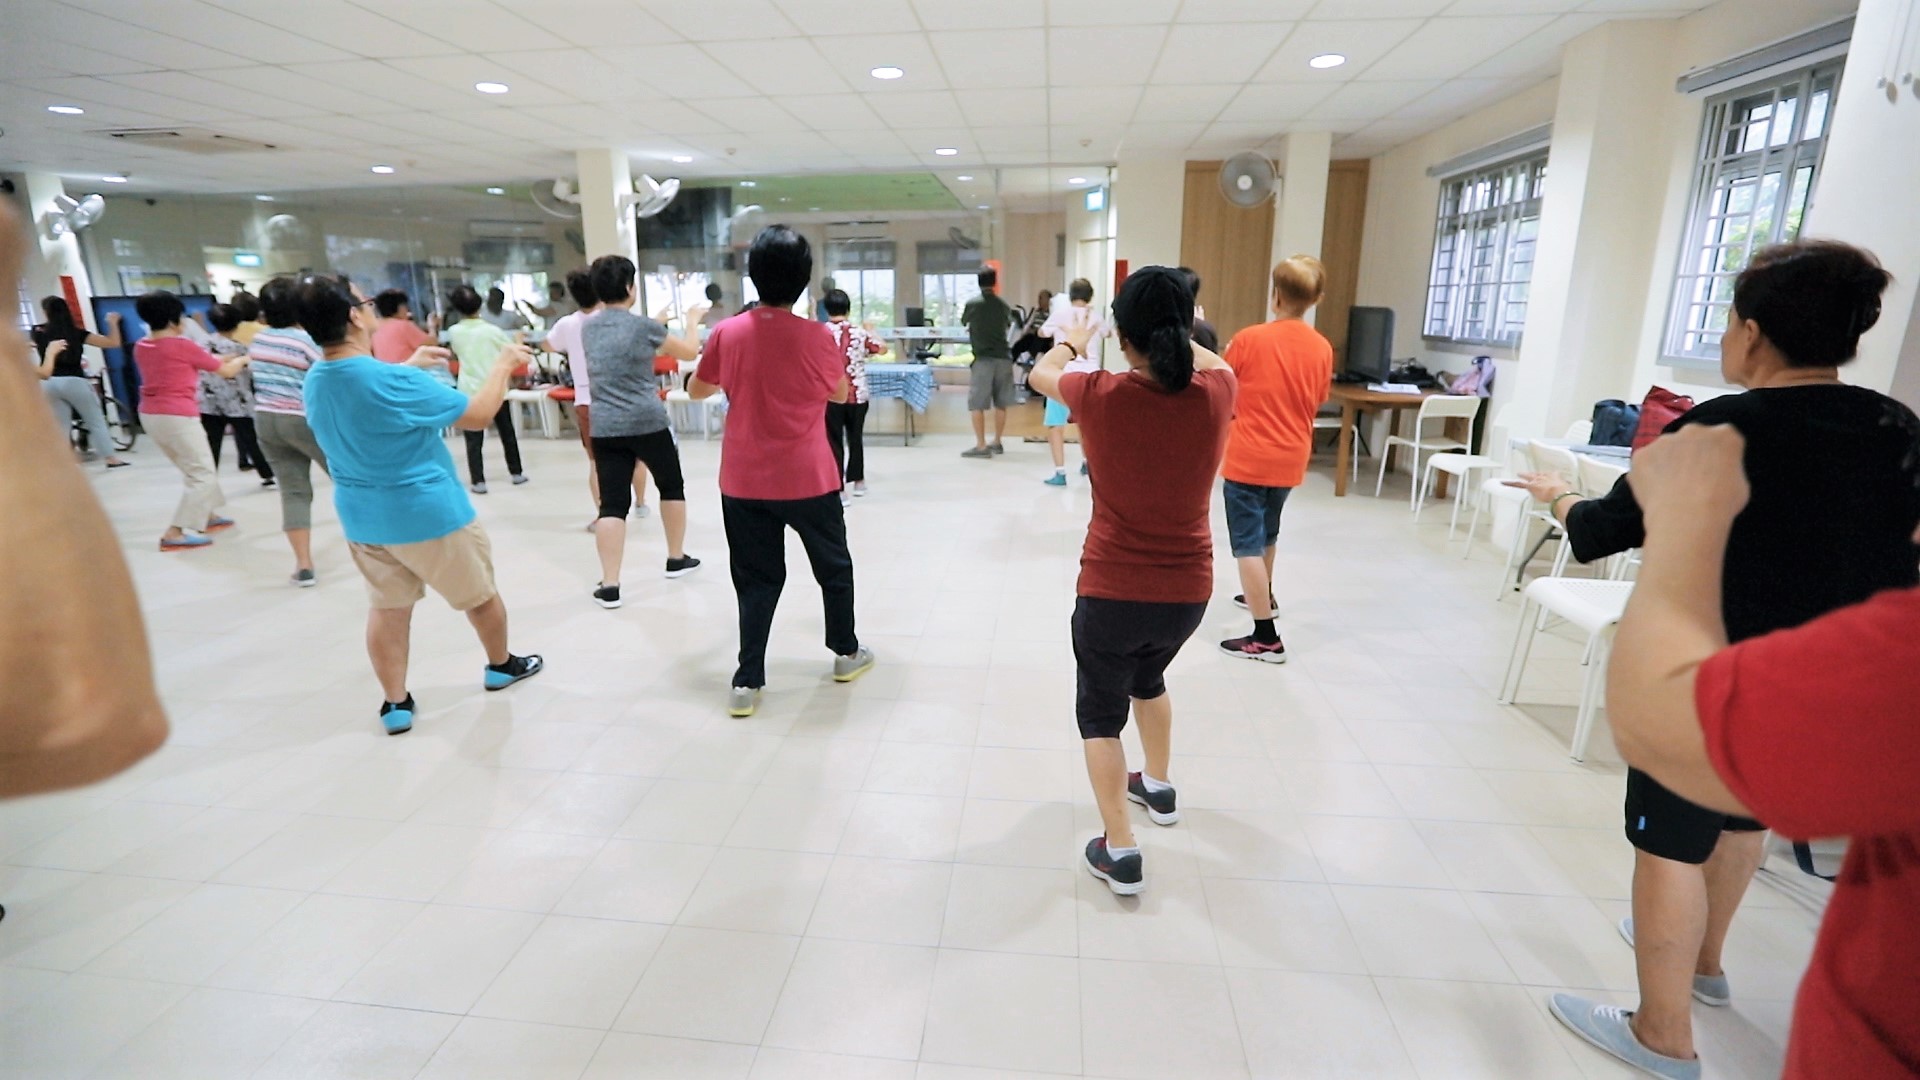 Elderly participating in a group exercise segment